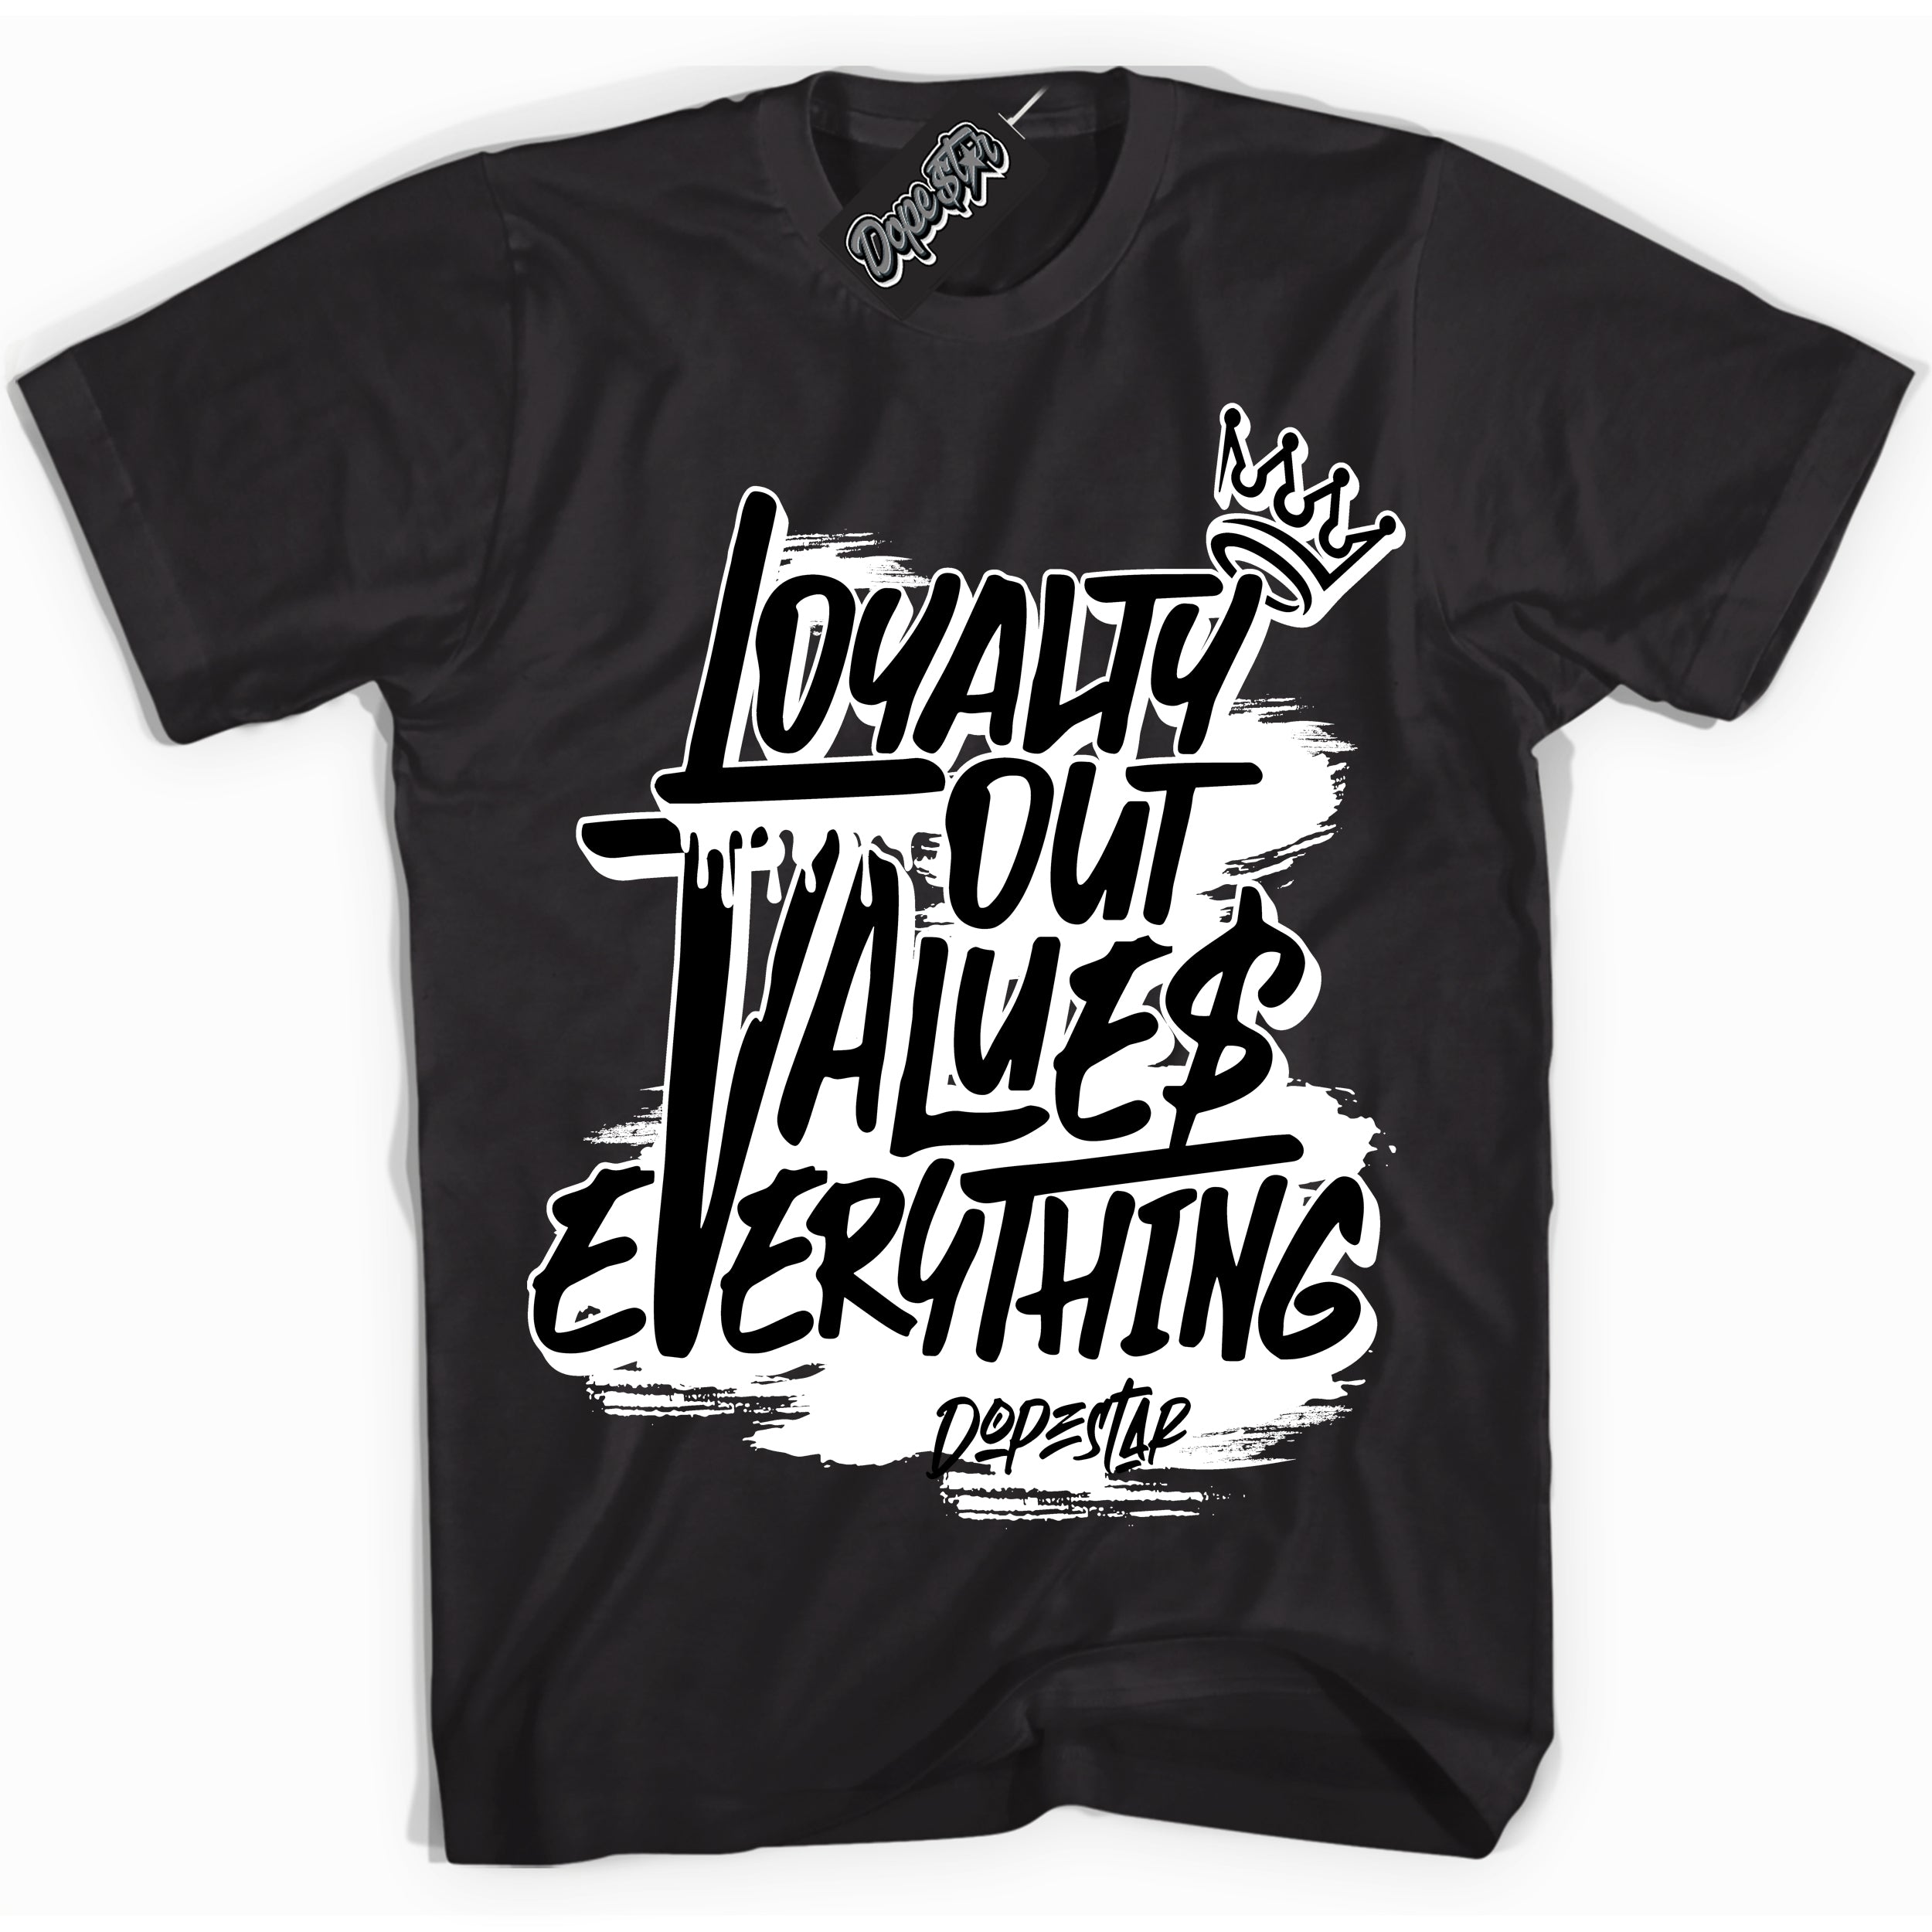 Cool Black Shirt with “ Loyalty Out Values Everything” design that perfectly matches Black White 1s Sneakers.